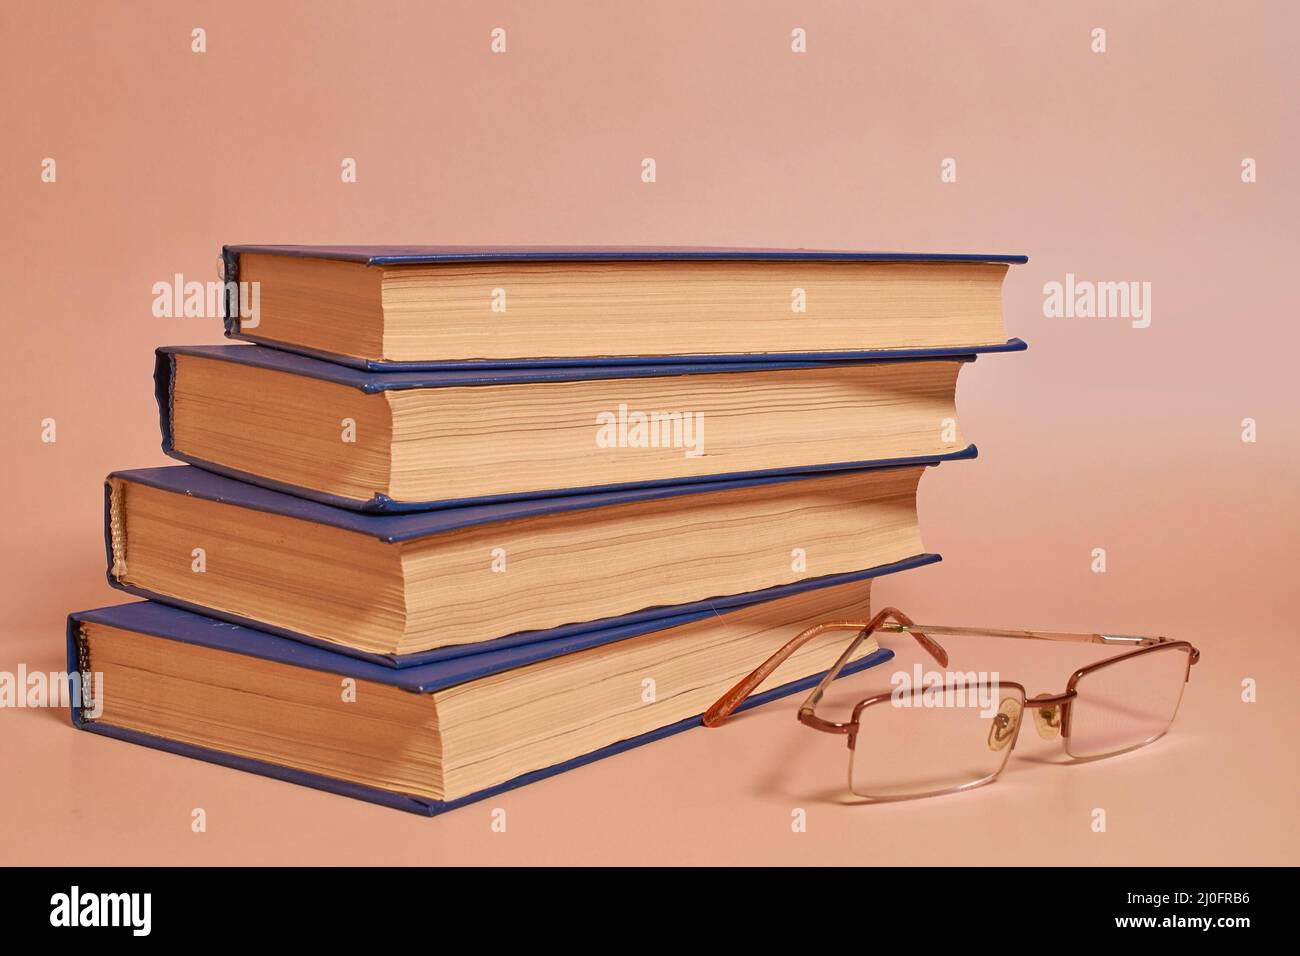 Reading glasses lie next to a stack of books on a colored background. Side view Stock Photo